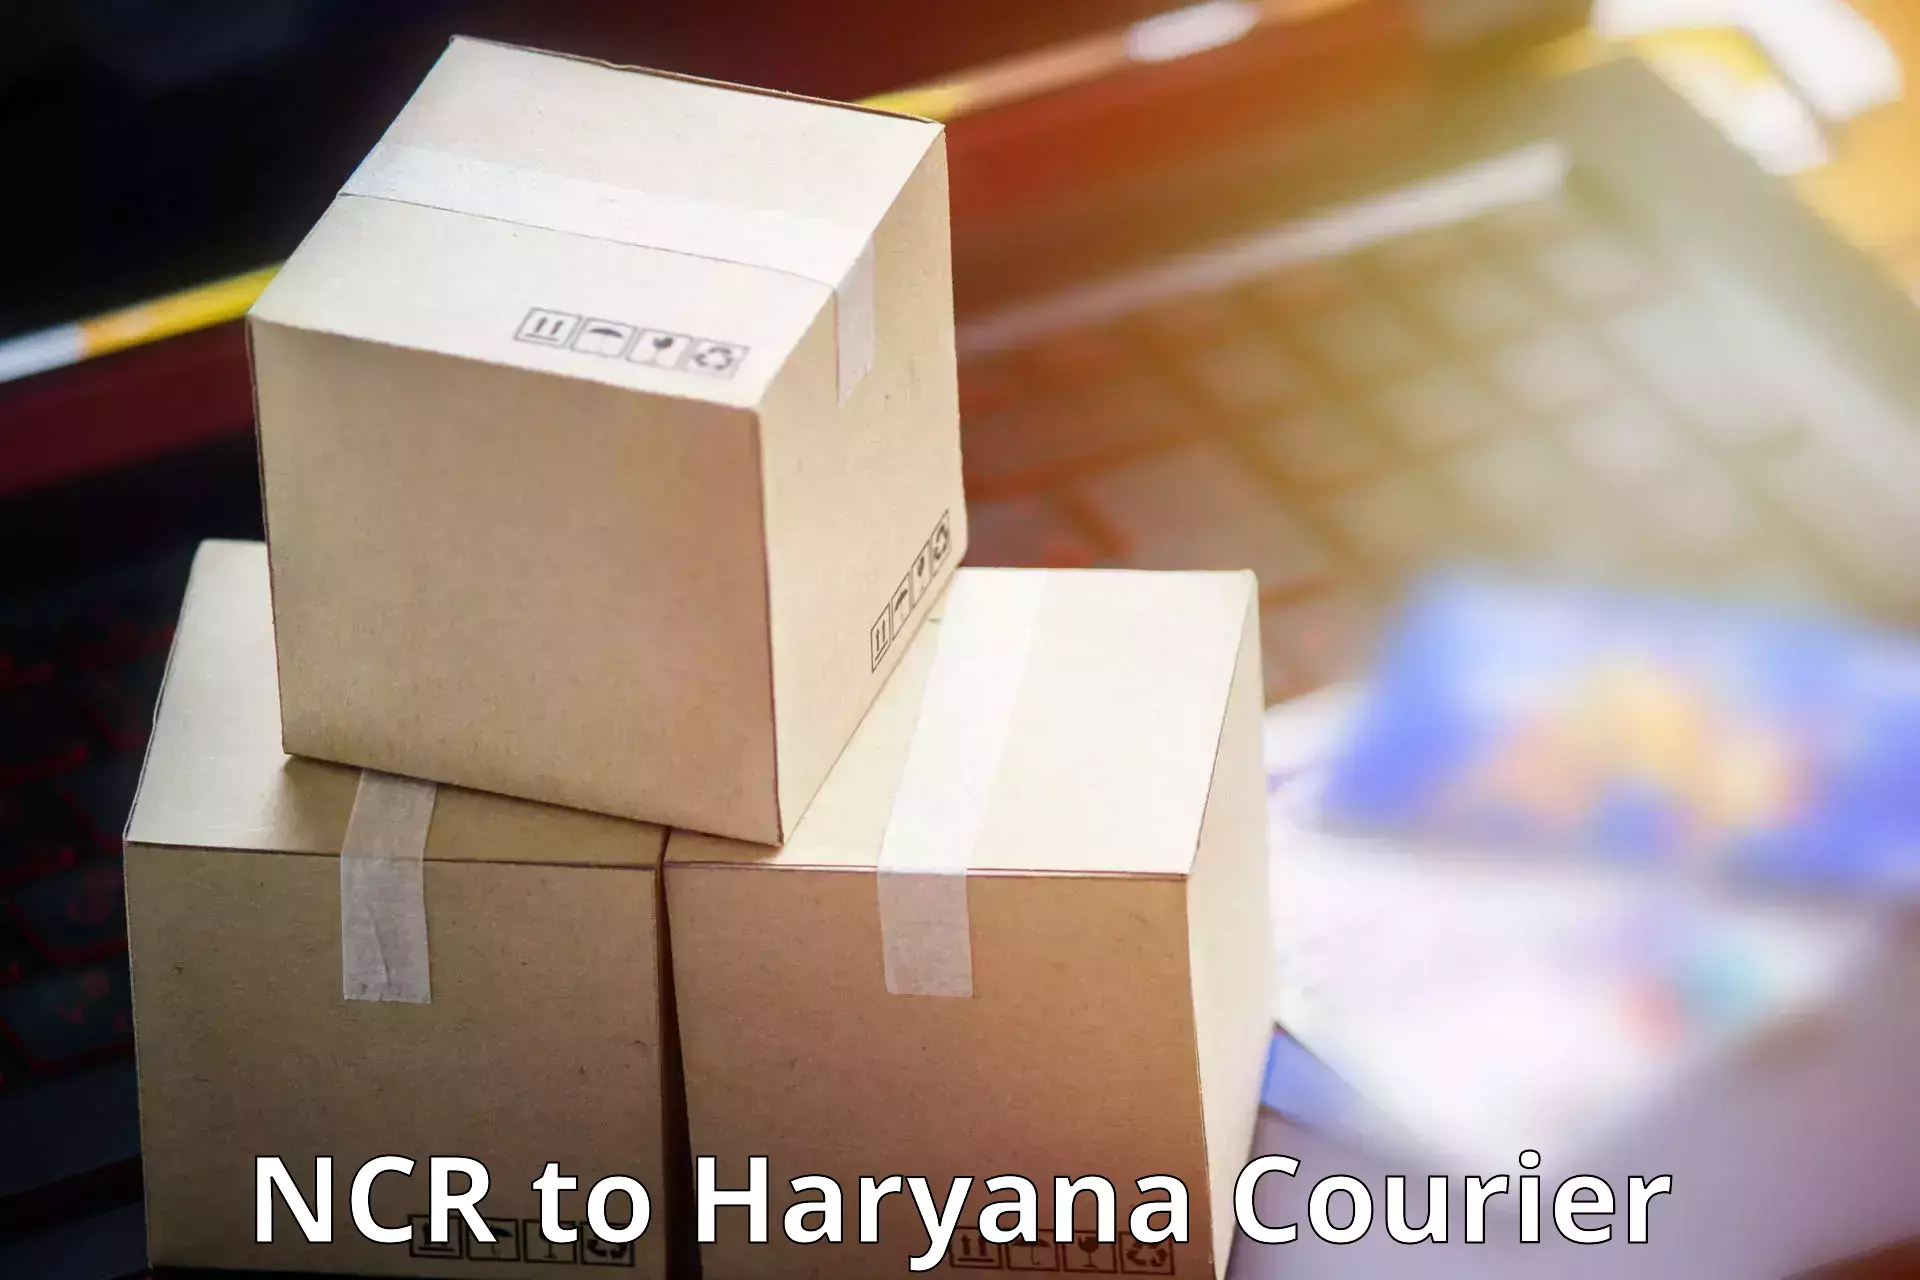 Speedy delivery service NCR to Panchkula